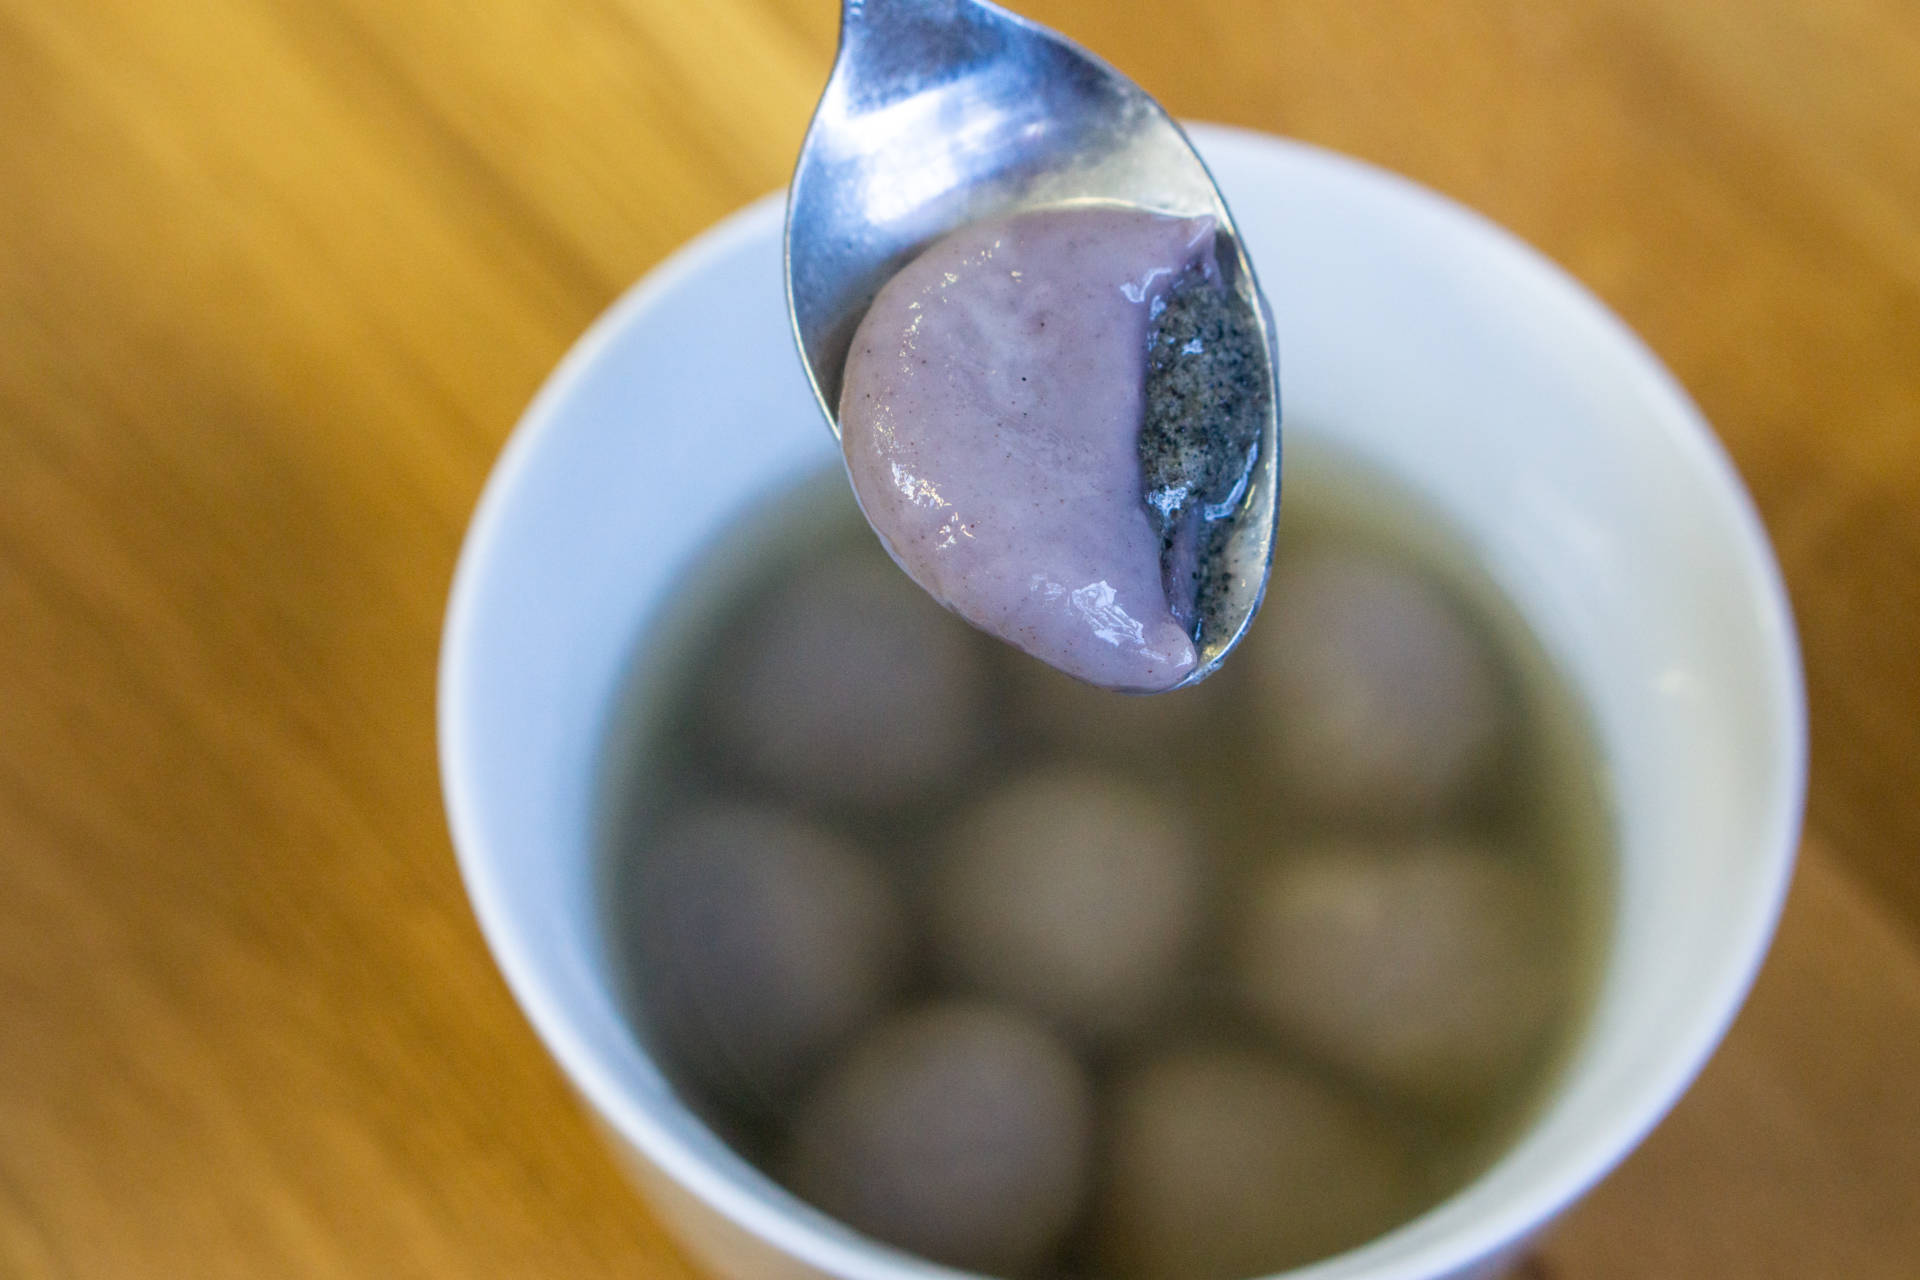 Black sesame tang yuan served in a cane sugar syrup.